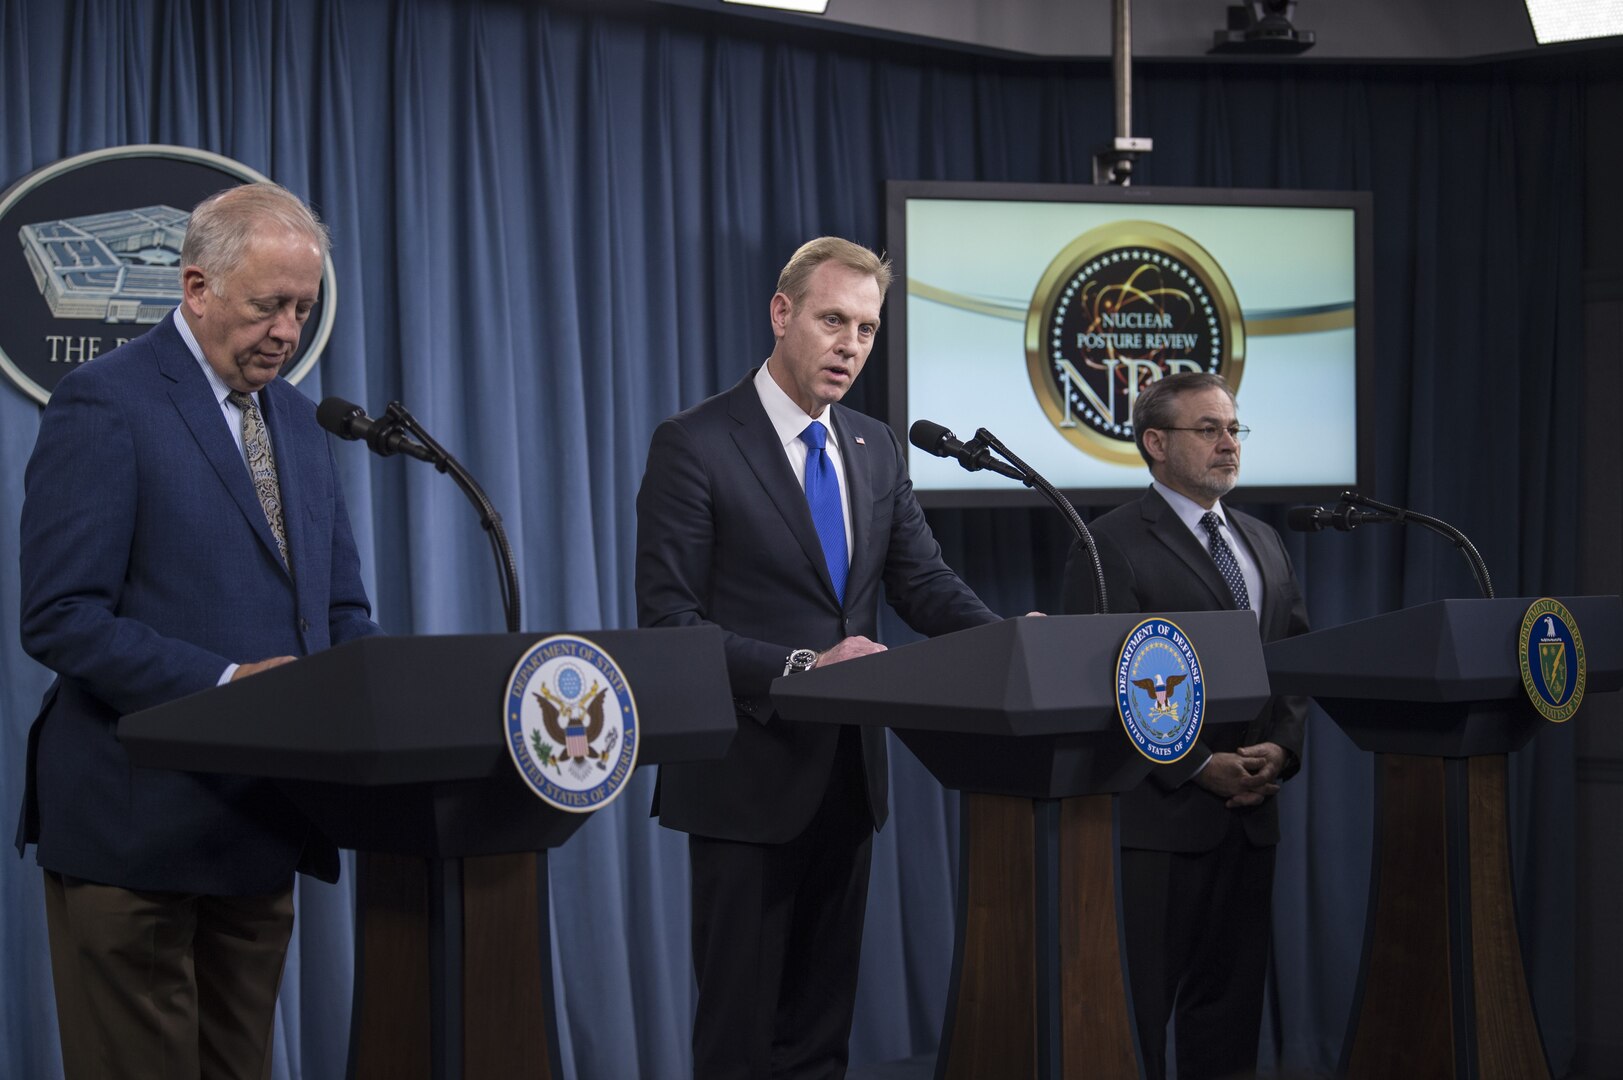 Deputy Defense Secretary Patrick M. Shanahan, center, Undersecretary of State for Political Affairs Thomas A. Shannon Jr., left, and Deputy Energy Secretary Dan Brouillette brief the press on the 2018 Nuclear Posture Review at the Pentagon.